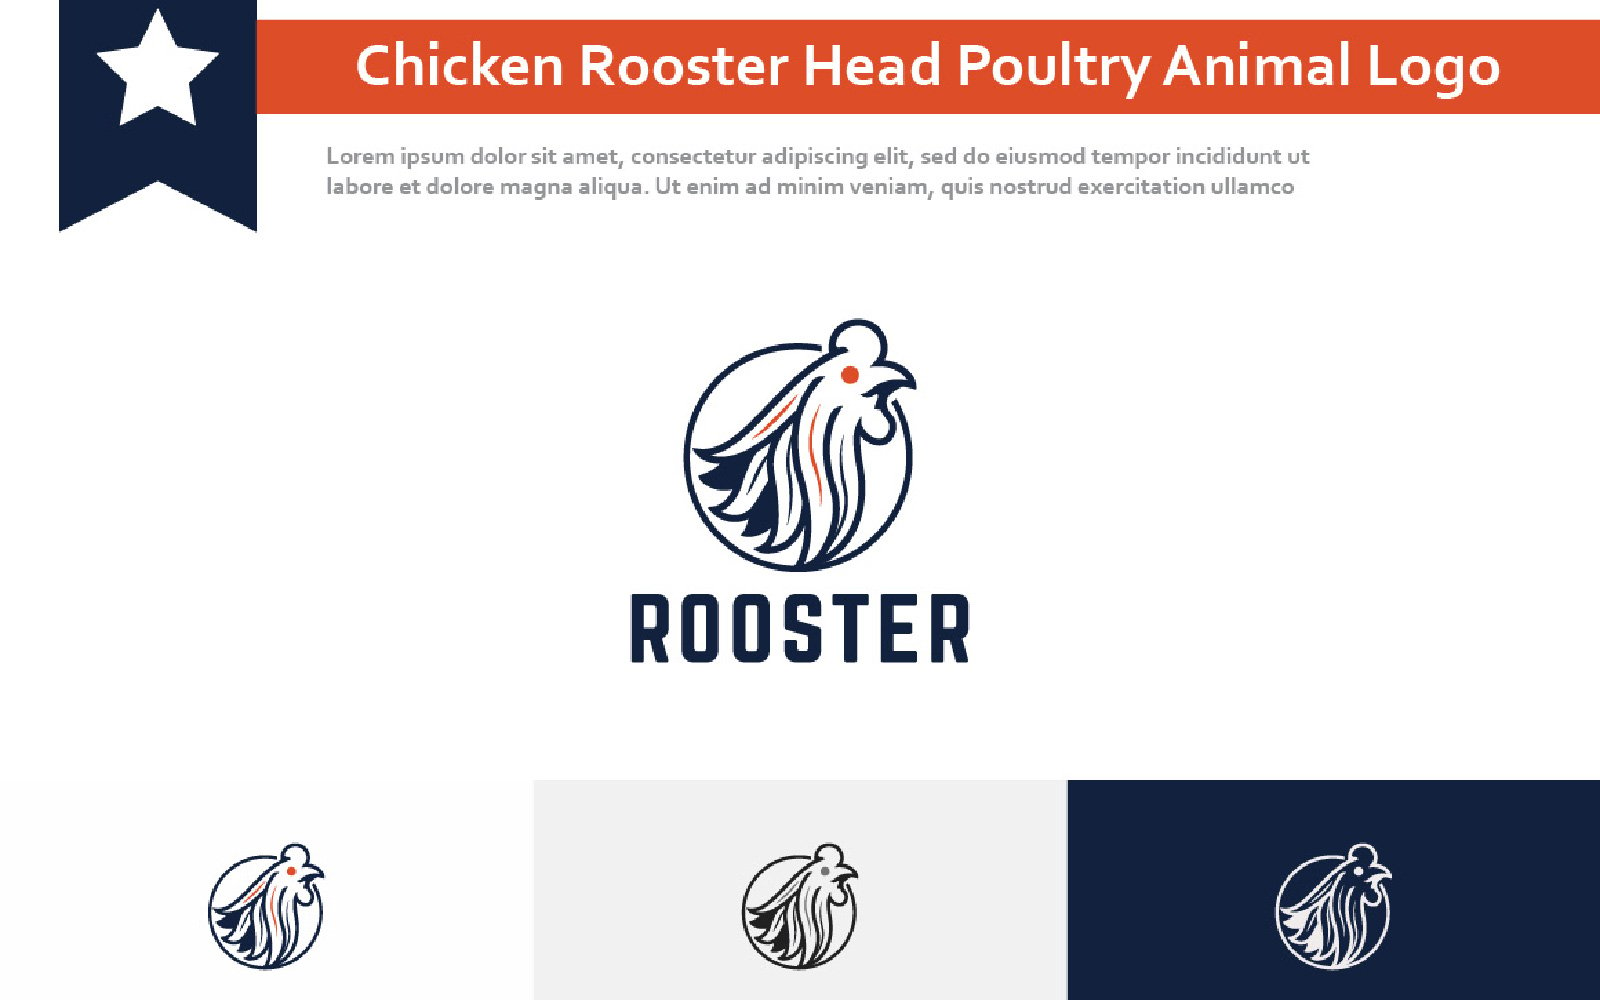 Chicken Rooster Head Poultry Animal Farm Logo